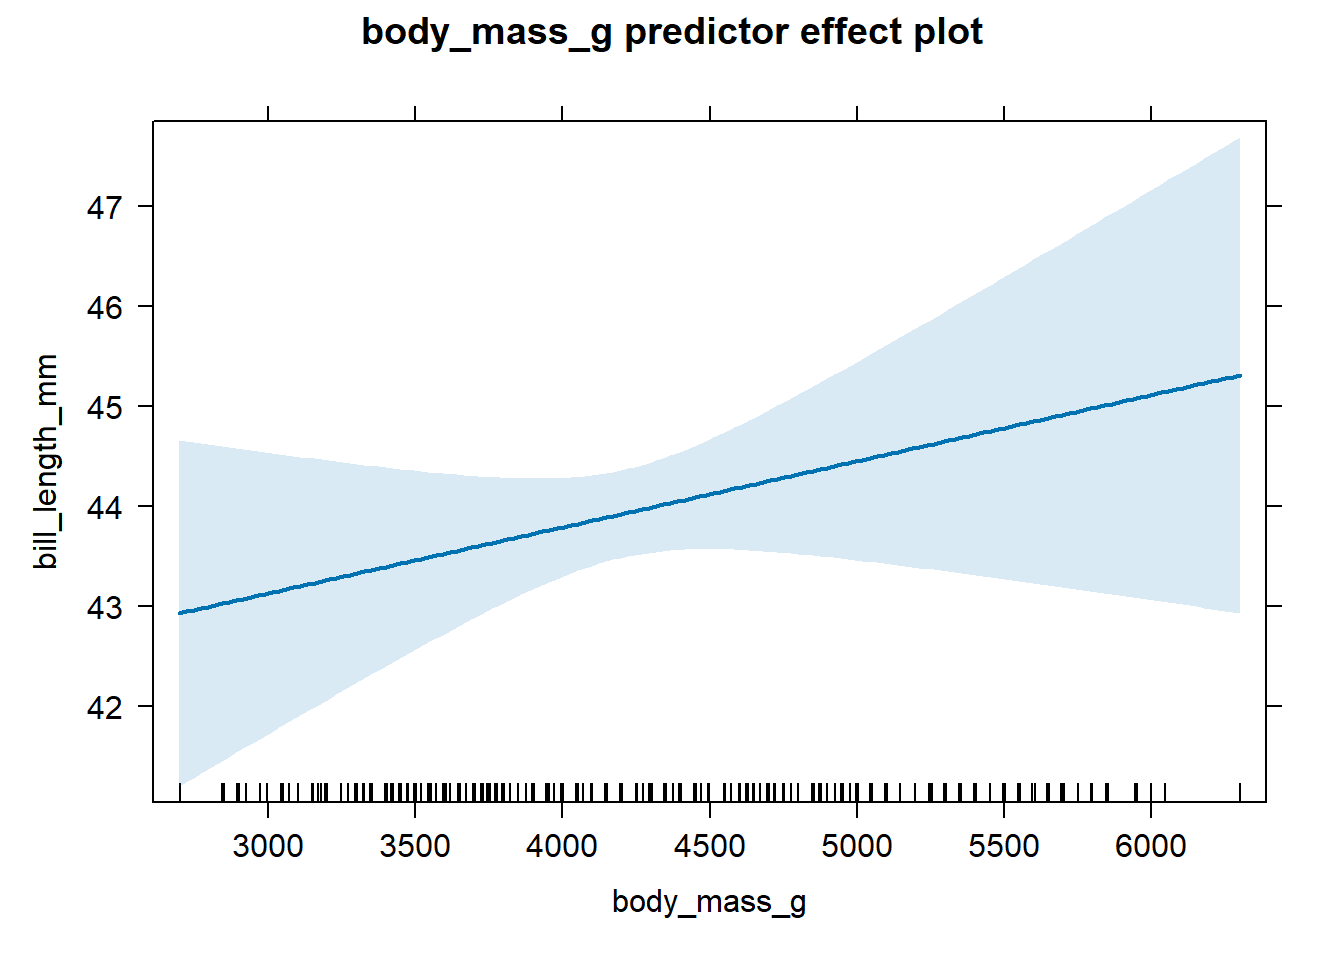 Effect plot for body mass based on the fitted model in Equation \@ref(eq:mlr-effect-equation).